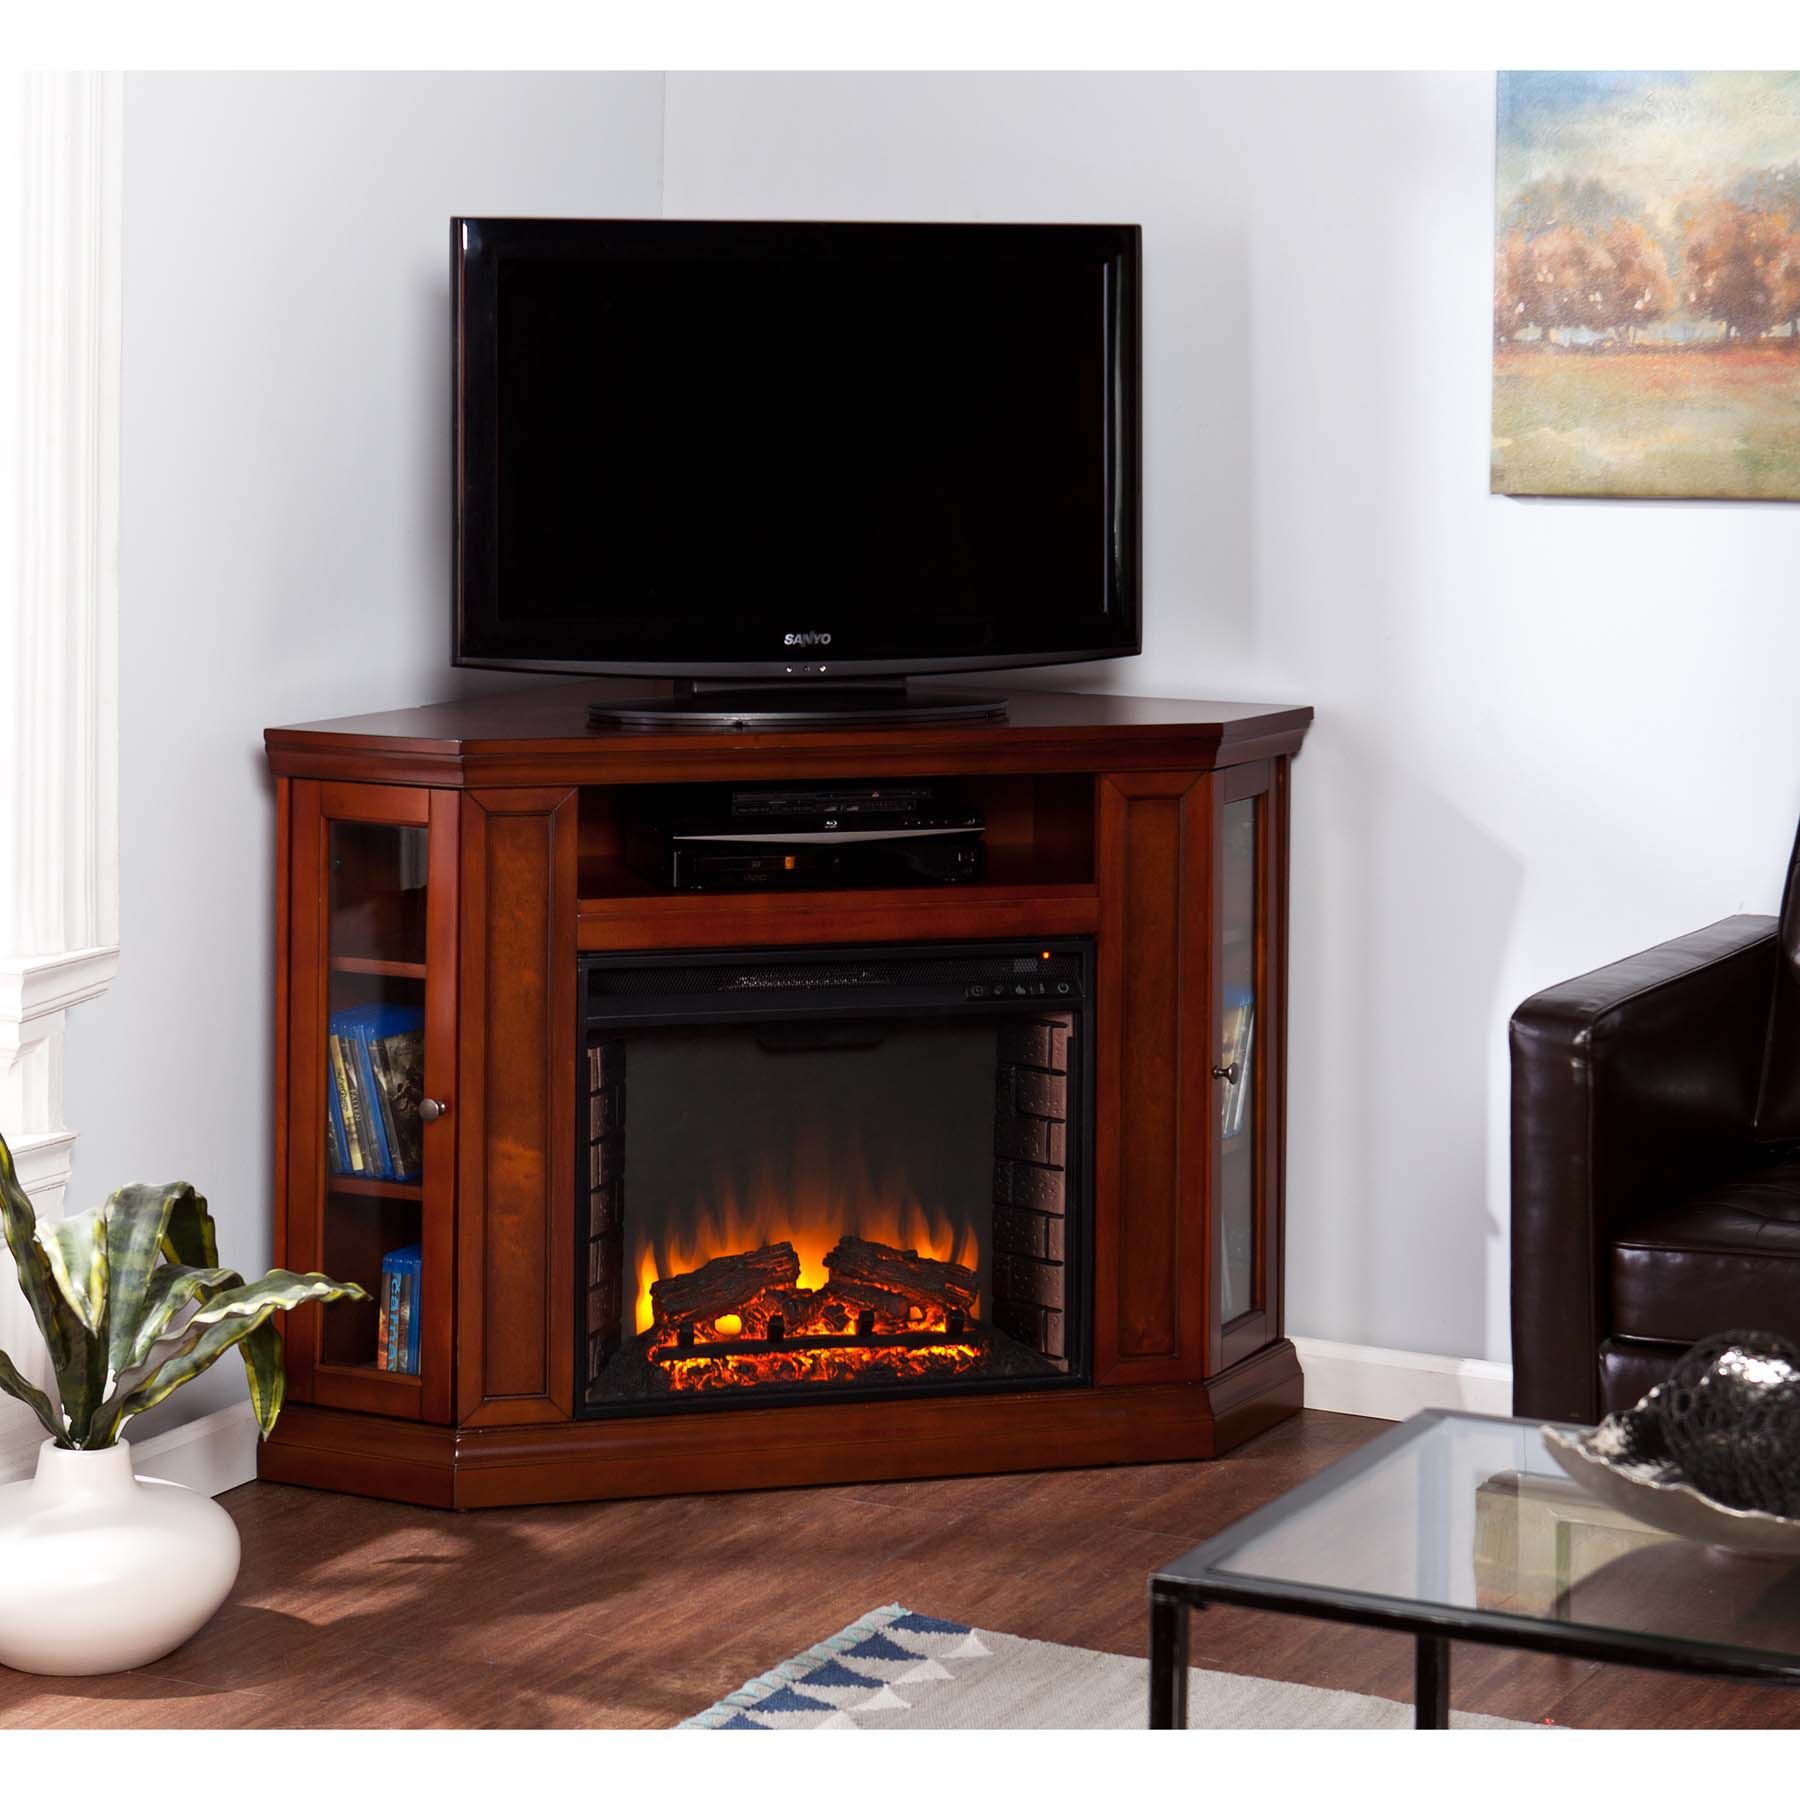 Duraflame Electric Fireplace Tv Stand Lovely 42 Best Rustic Fireplace Images